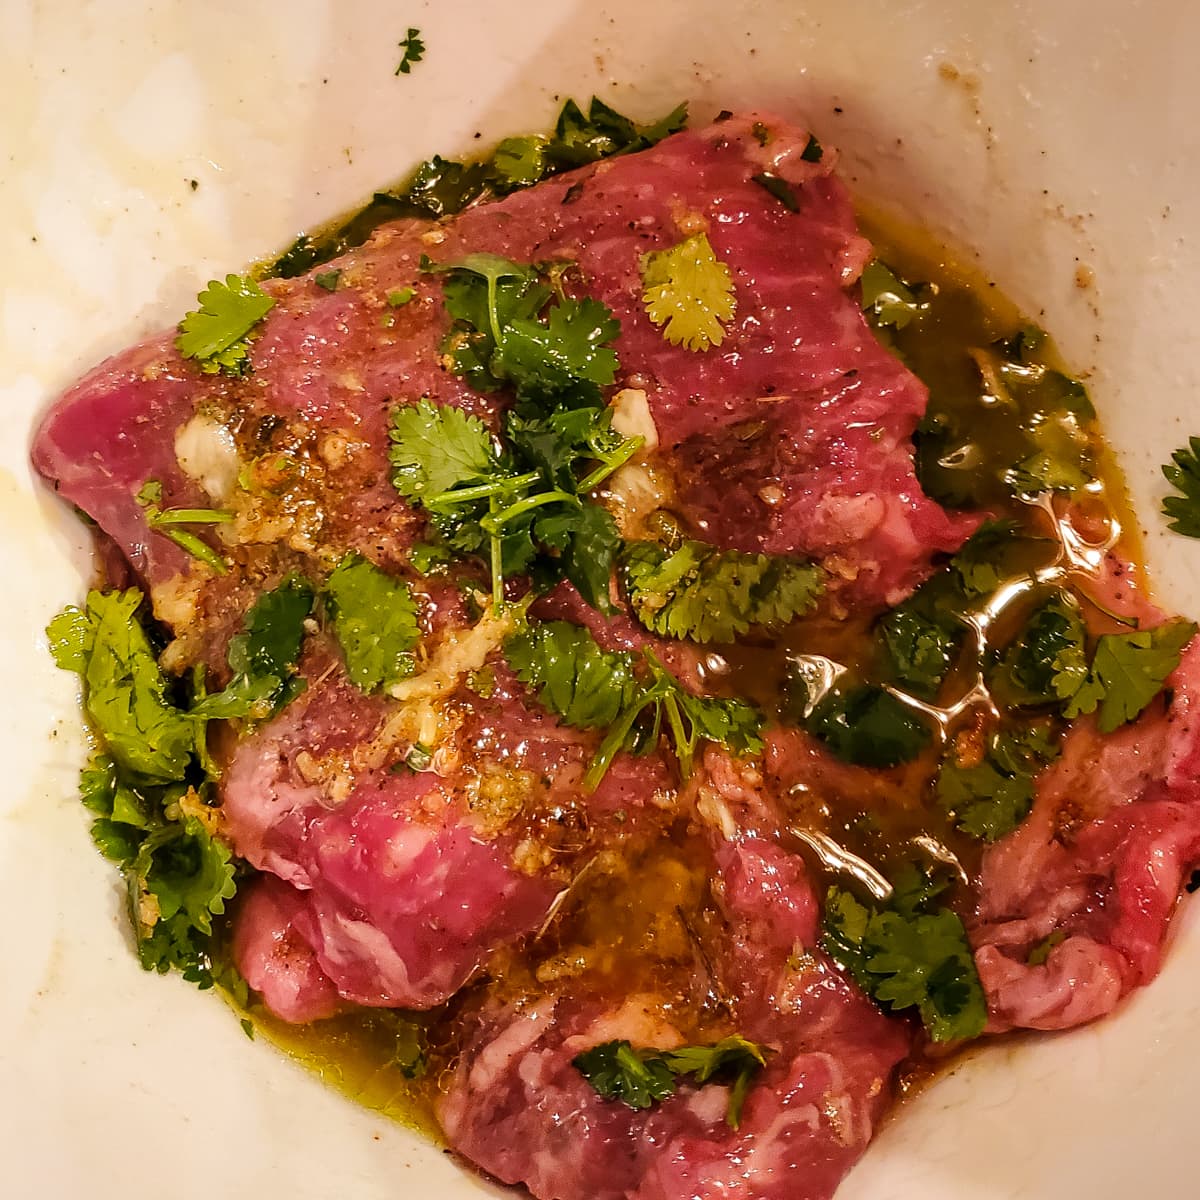 Skirt steak for authentic carne asada in a marinade.